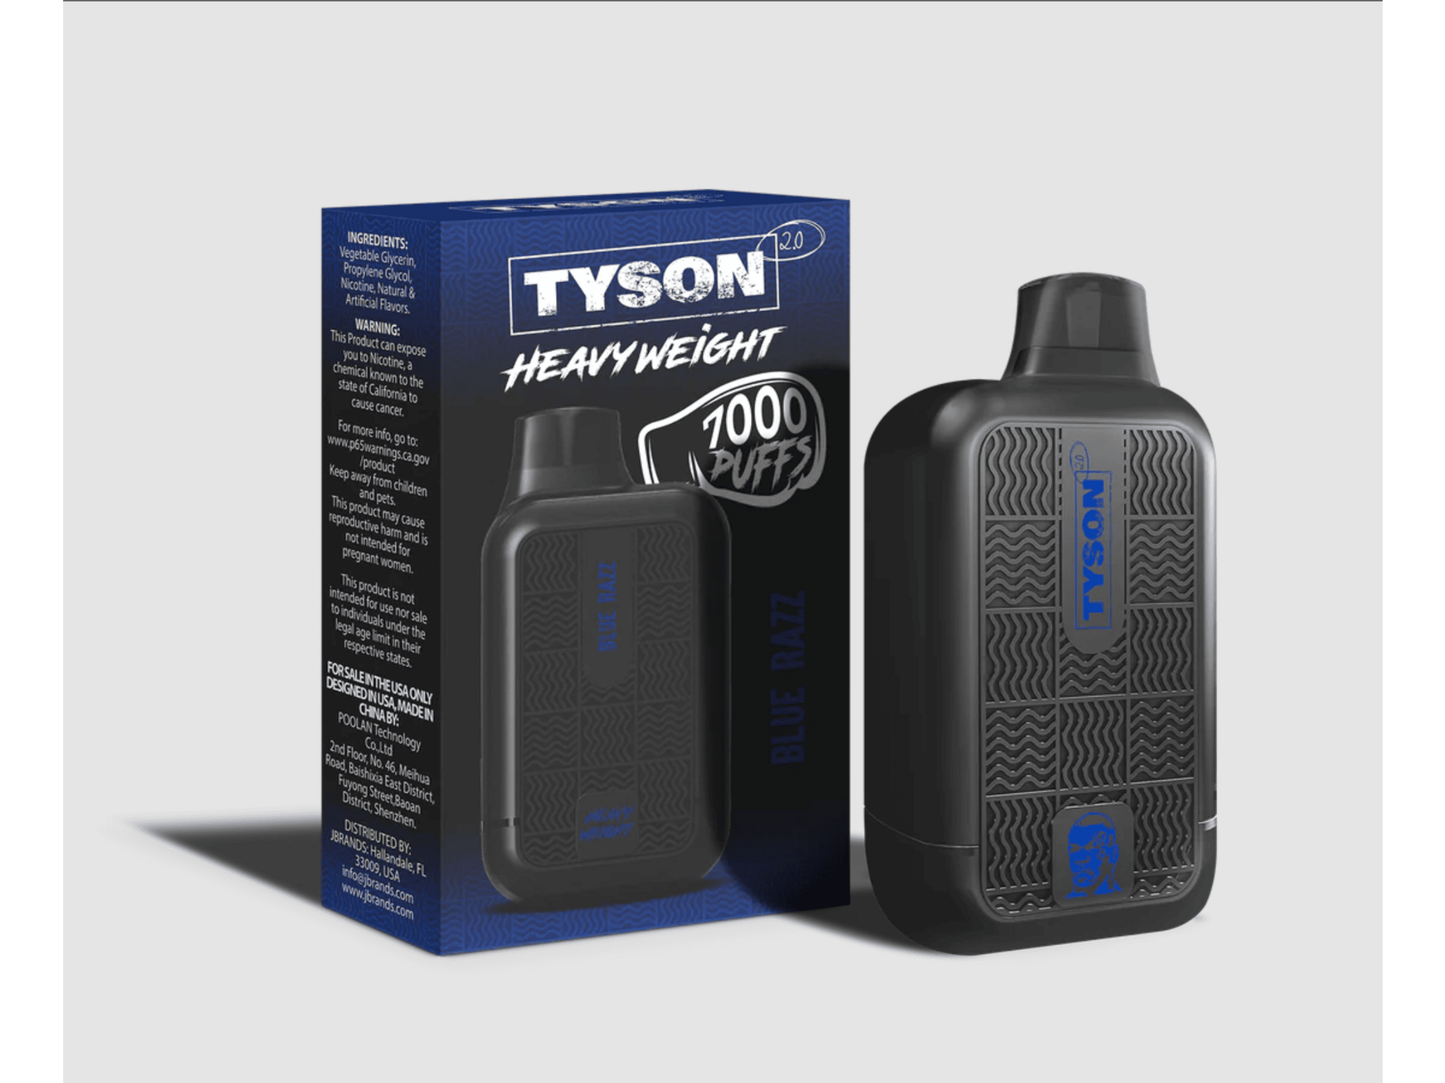 Tyson Heavyweight Blue Razz flavored disposable vape device and box.